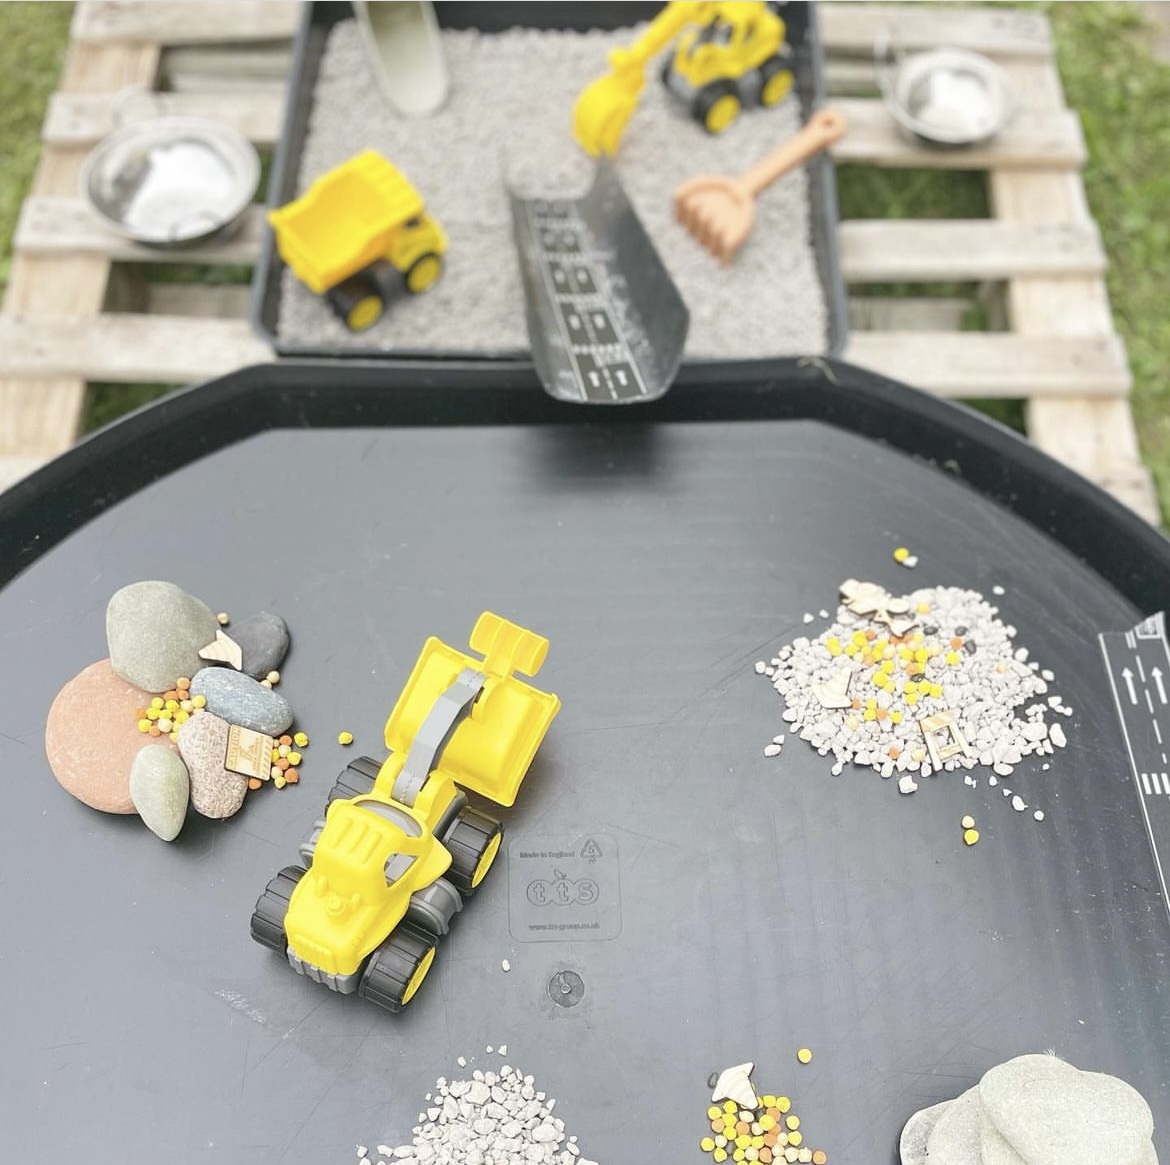 17 Tuff Tray Construction Ideas That Toddlers Will Love! - Bjarni Baby